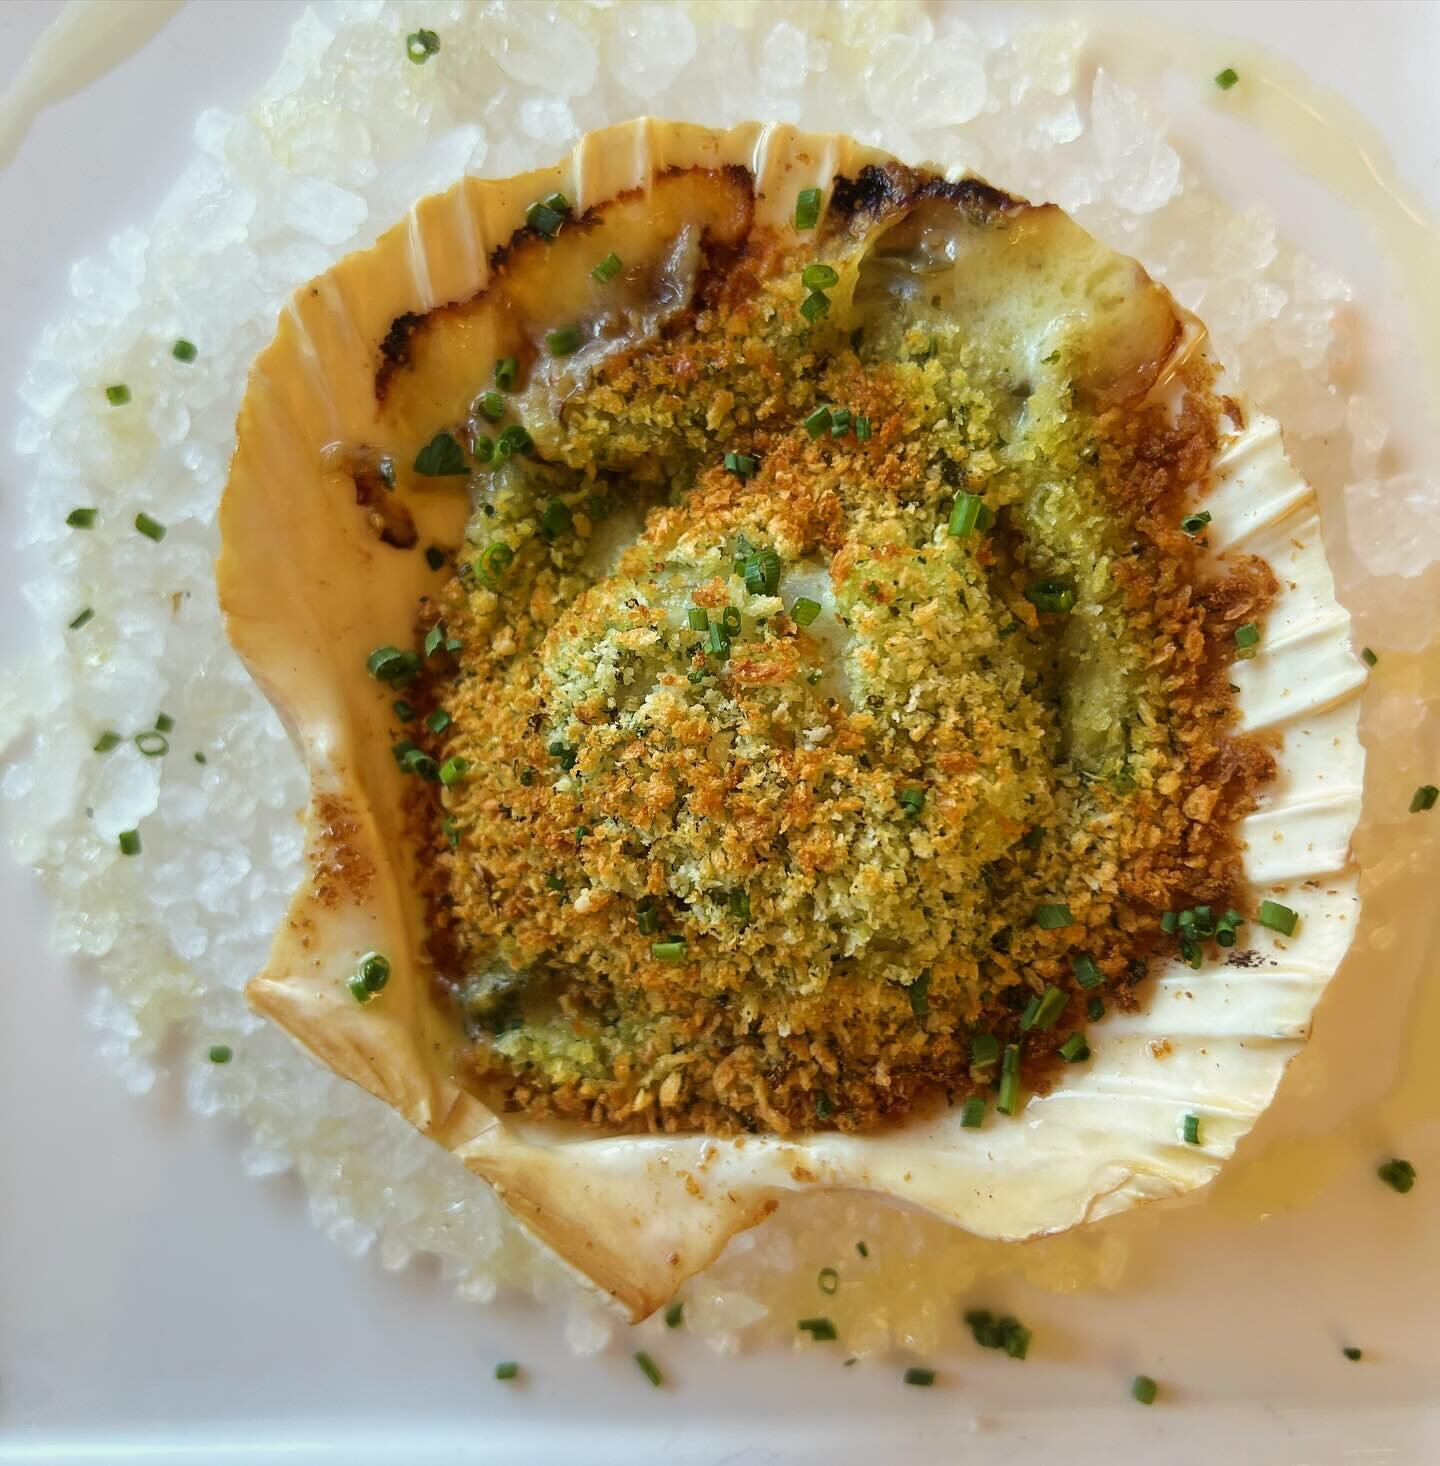 This is the Hokkaido Scallop Rockefeller that is currently on our Happy Hour menu. The deliciously rich scallop is ordered individually, enjoy as many as you&rsquo;d like!